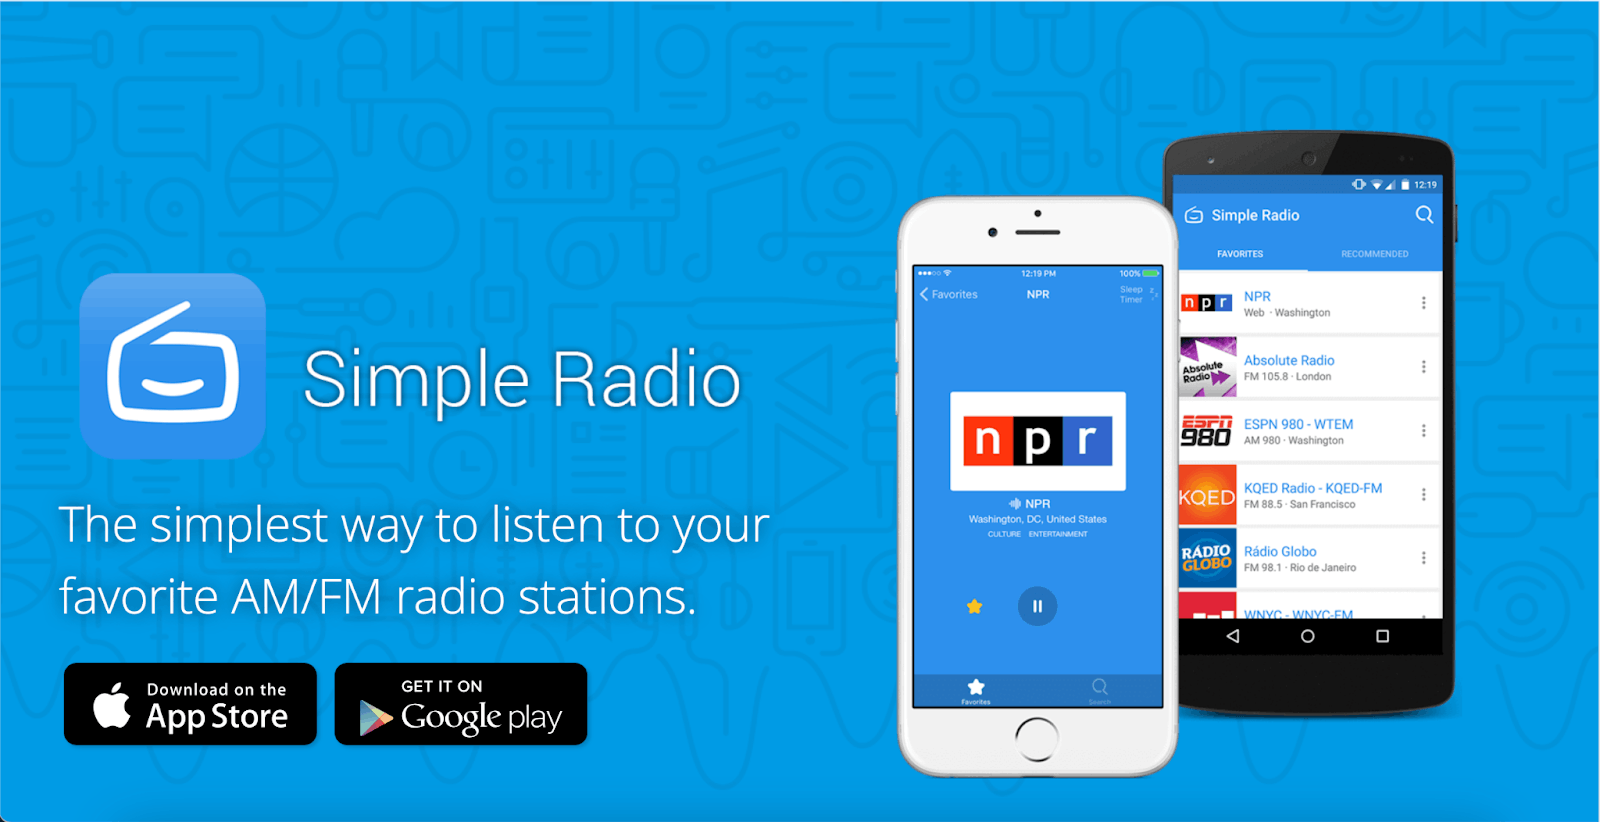 Mobile Radio Application: Listen to Free Music on Mobile